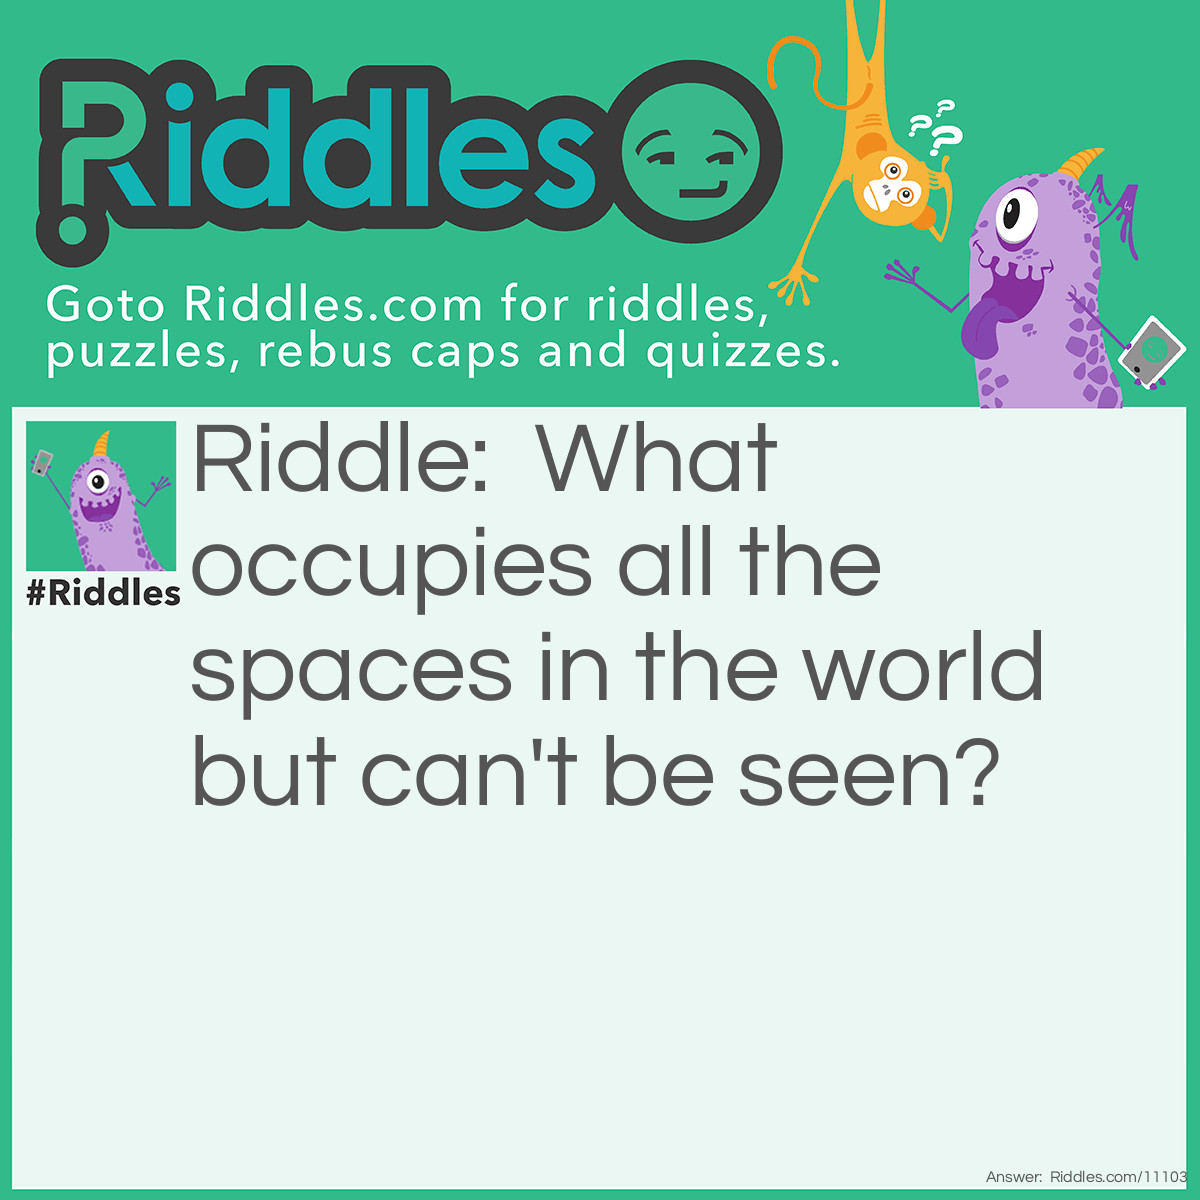 Riddle: What occupies all the spaces in the world but can't be seen? Answer: Air.